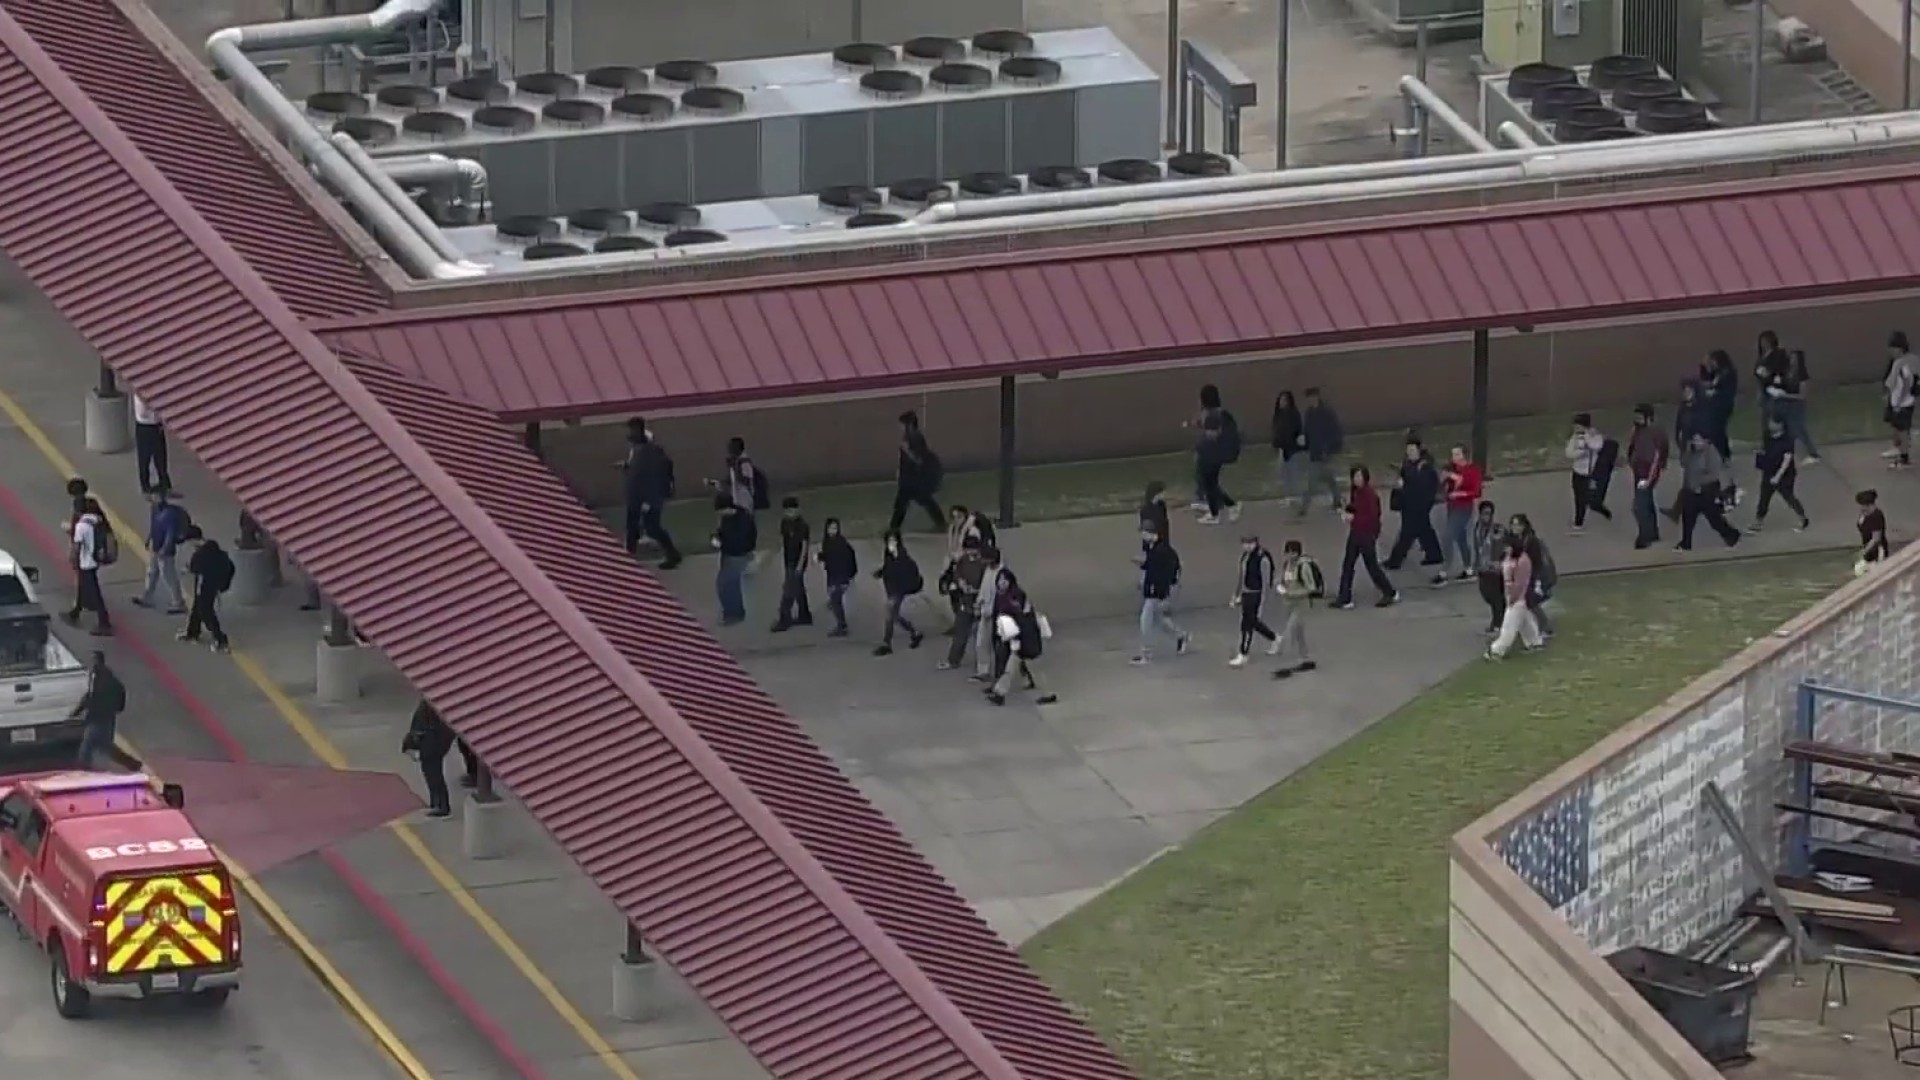 Texas Teens Face Criminal Charges for 'Fart Spray' Prank at School: Reports